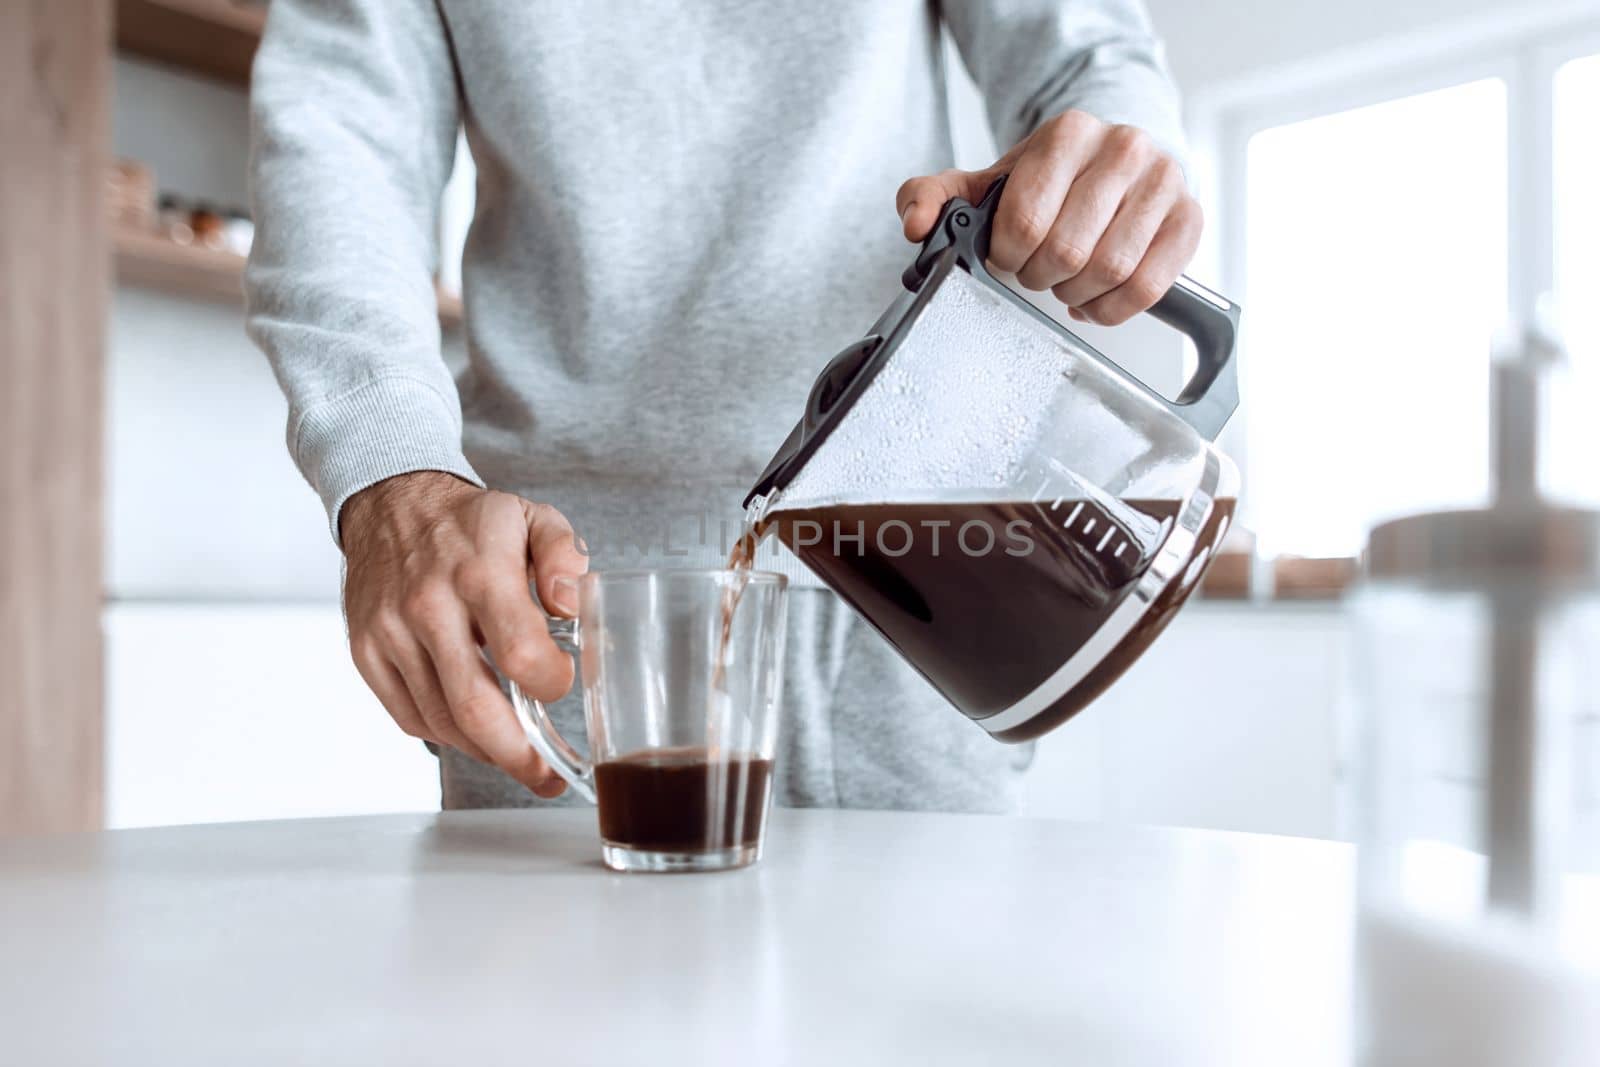 man pours himself a cup of coffee by asdf